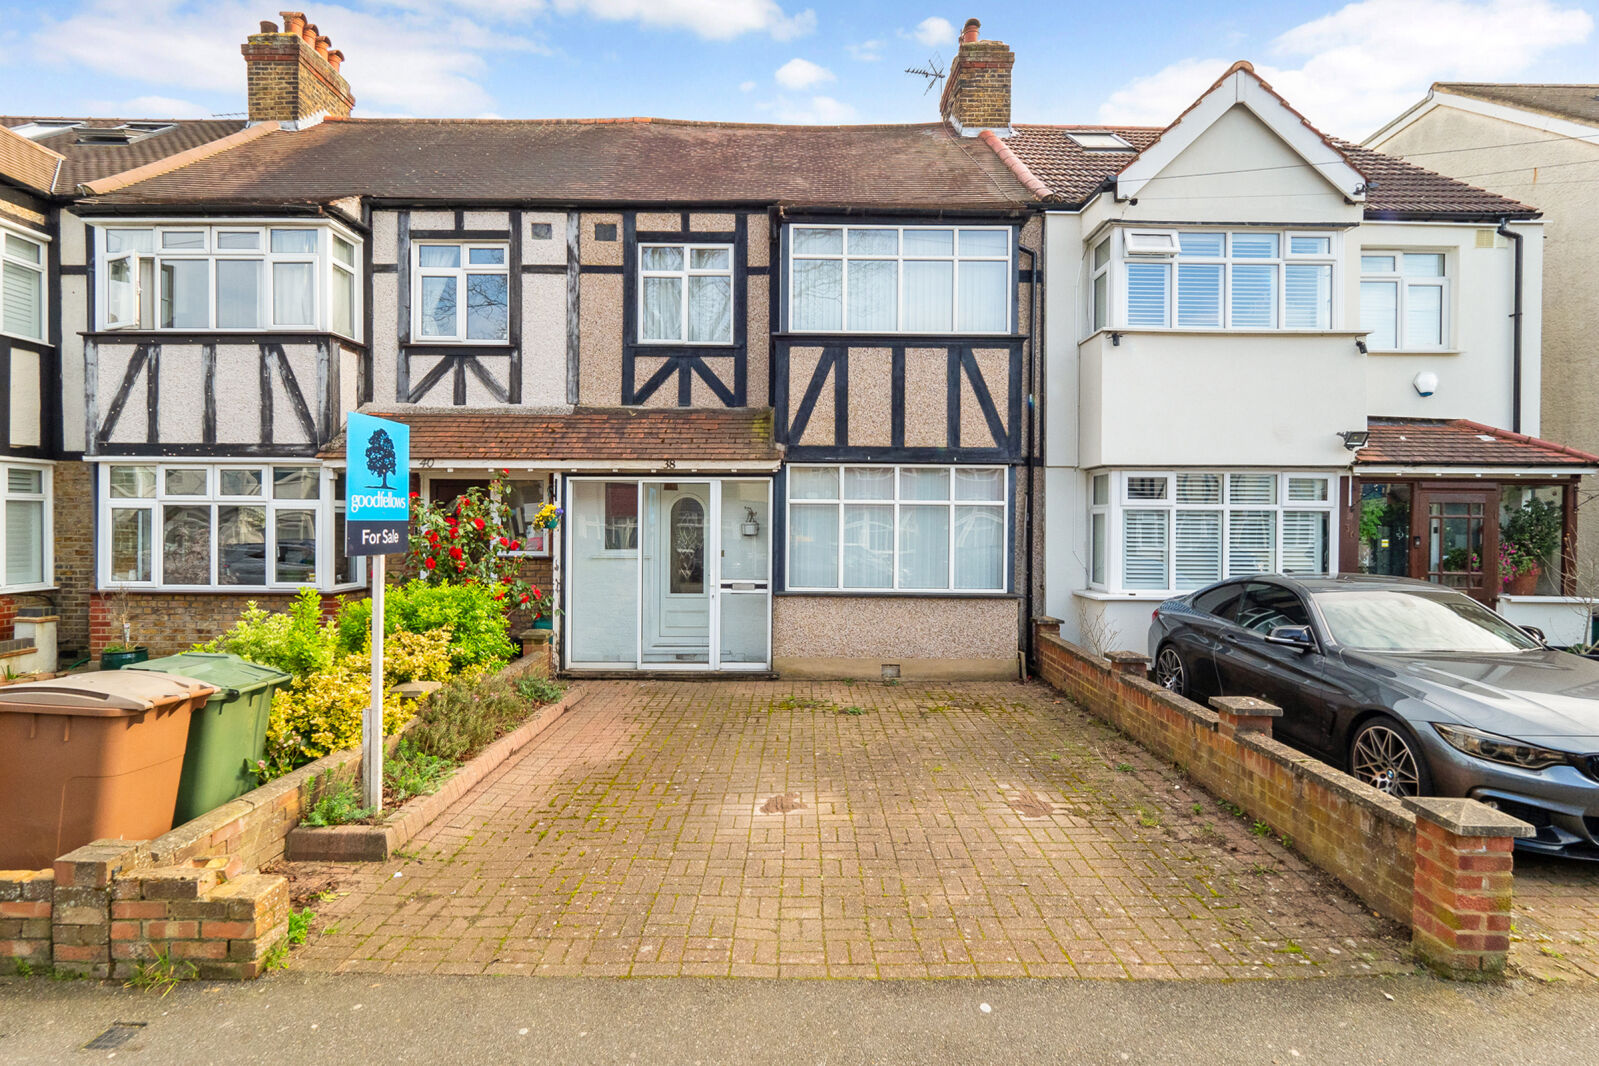 4 bedroom mid terraced house for sale Chatsworth Road, Cheam, SM3, main image